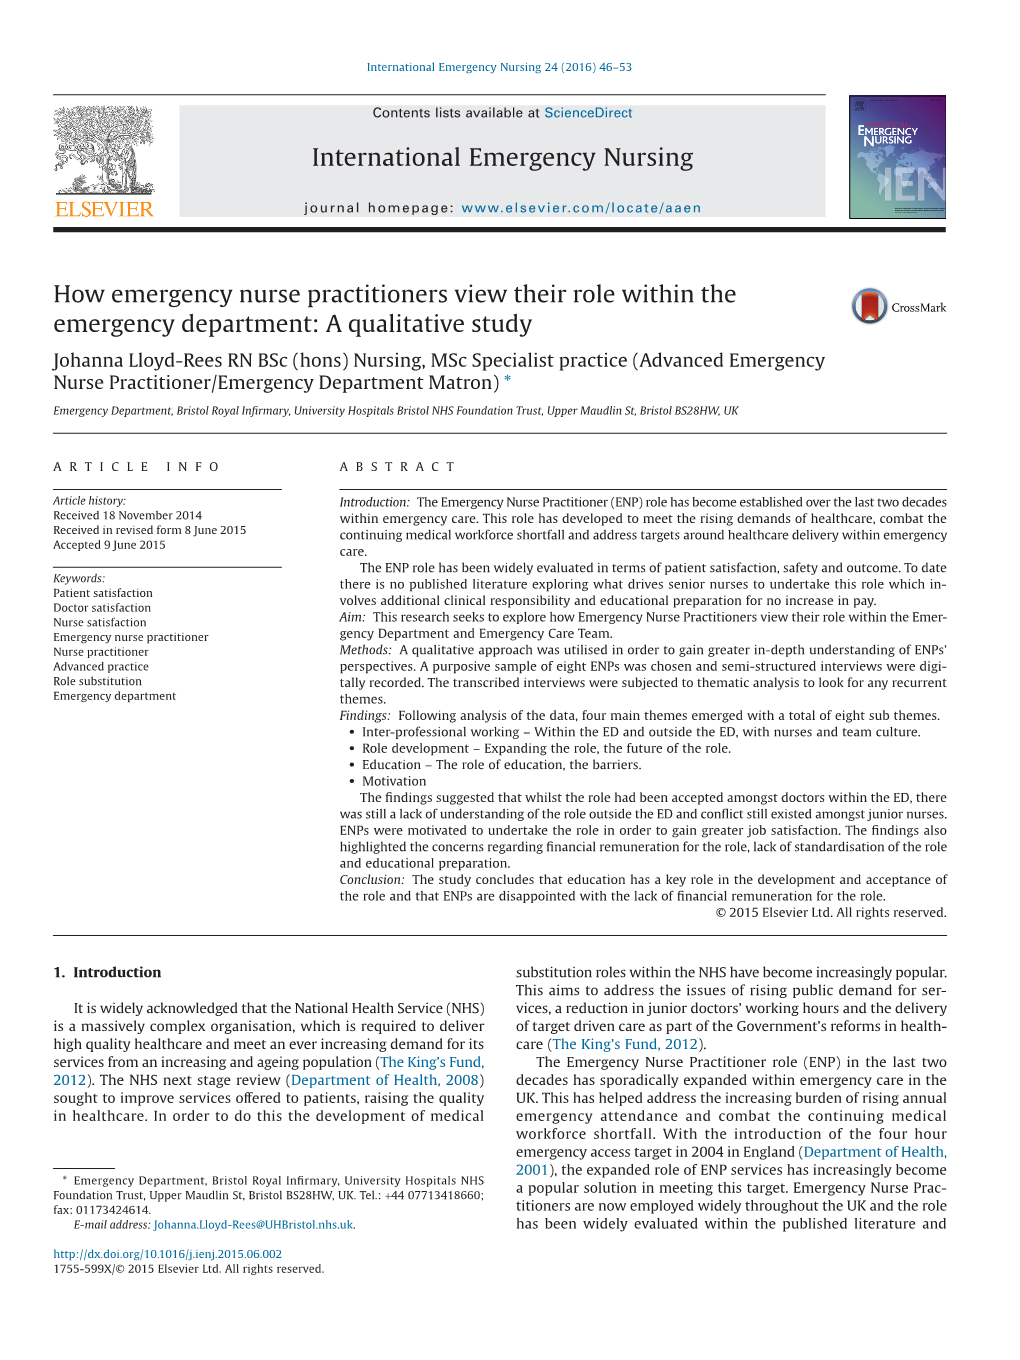 How Emergency Nurse Practitioners View Their Role Within the Emergency Department: a Qualitative Study